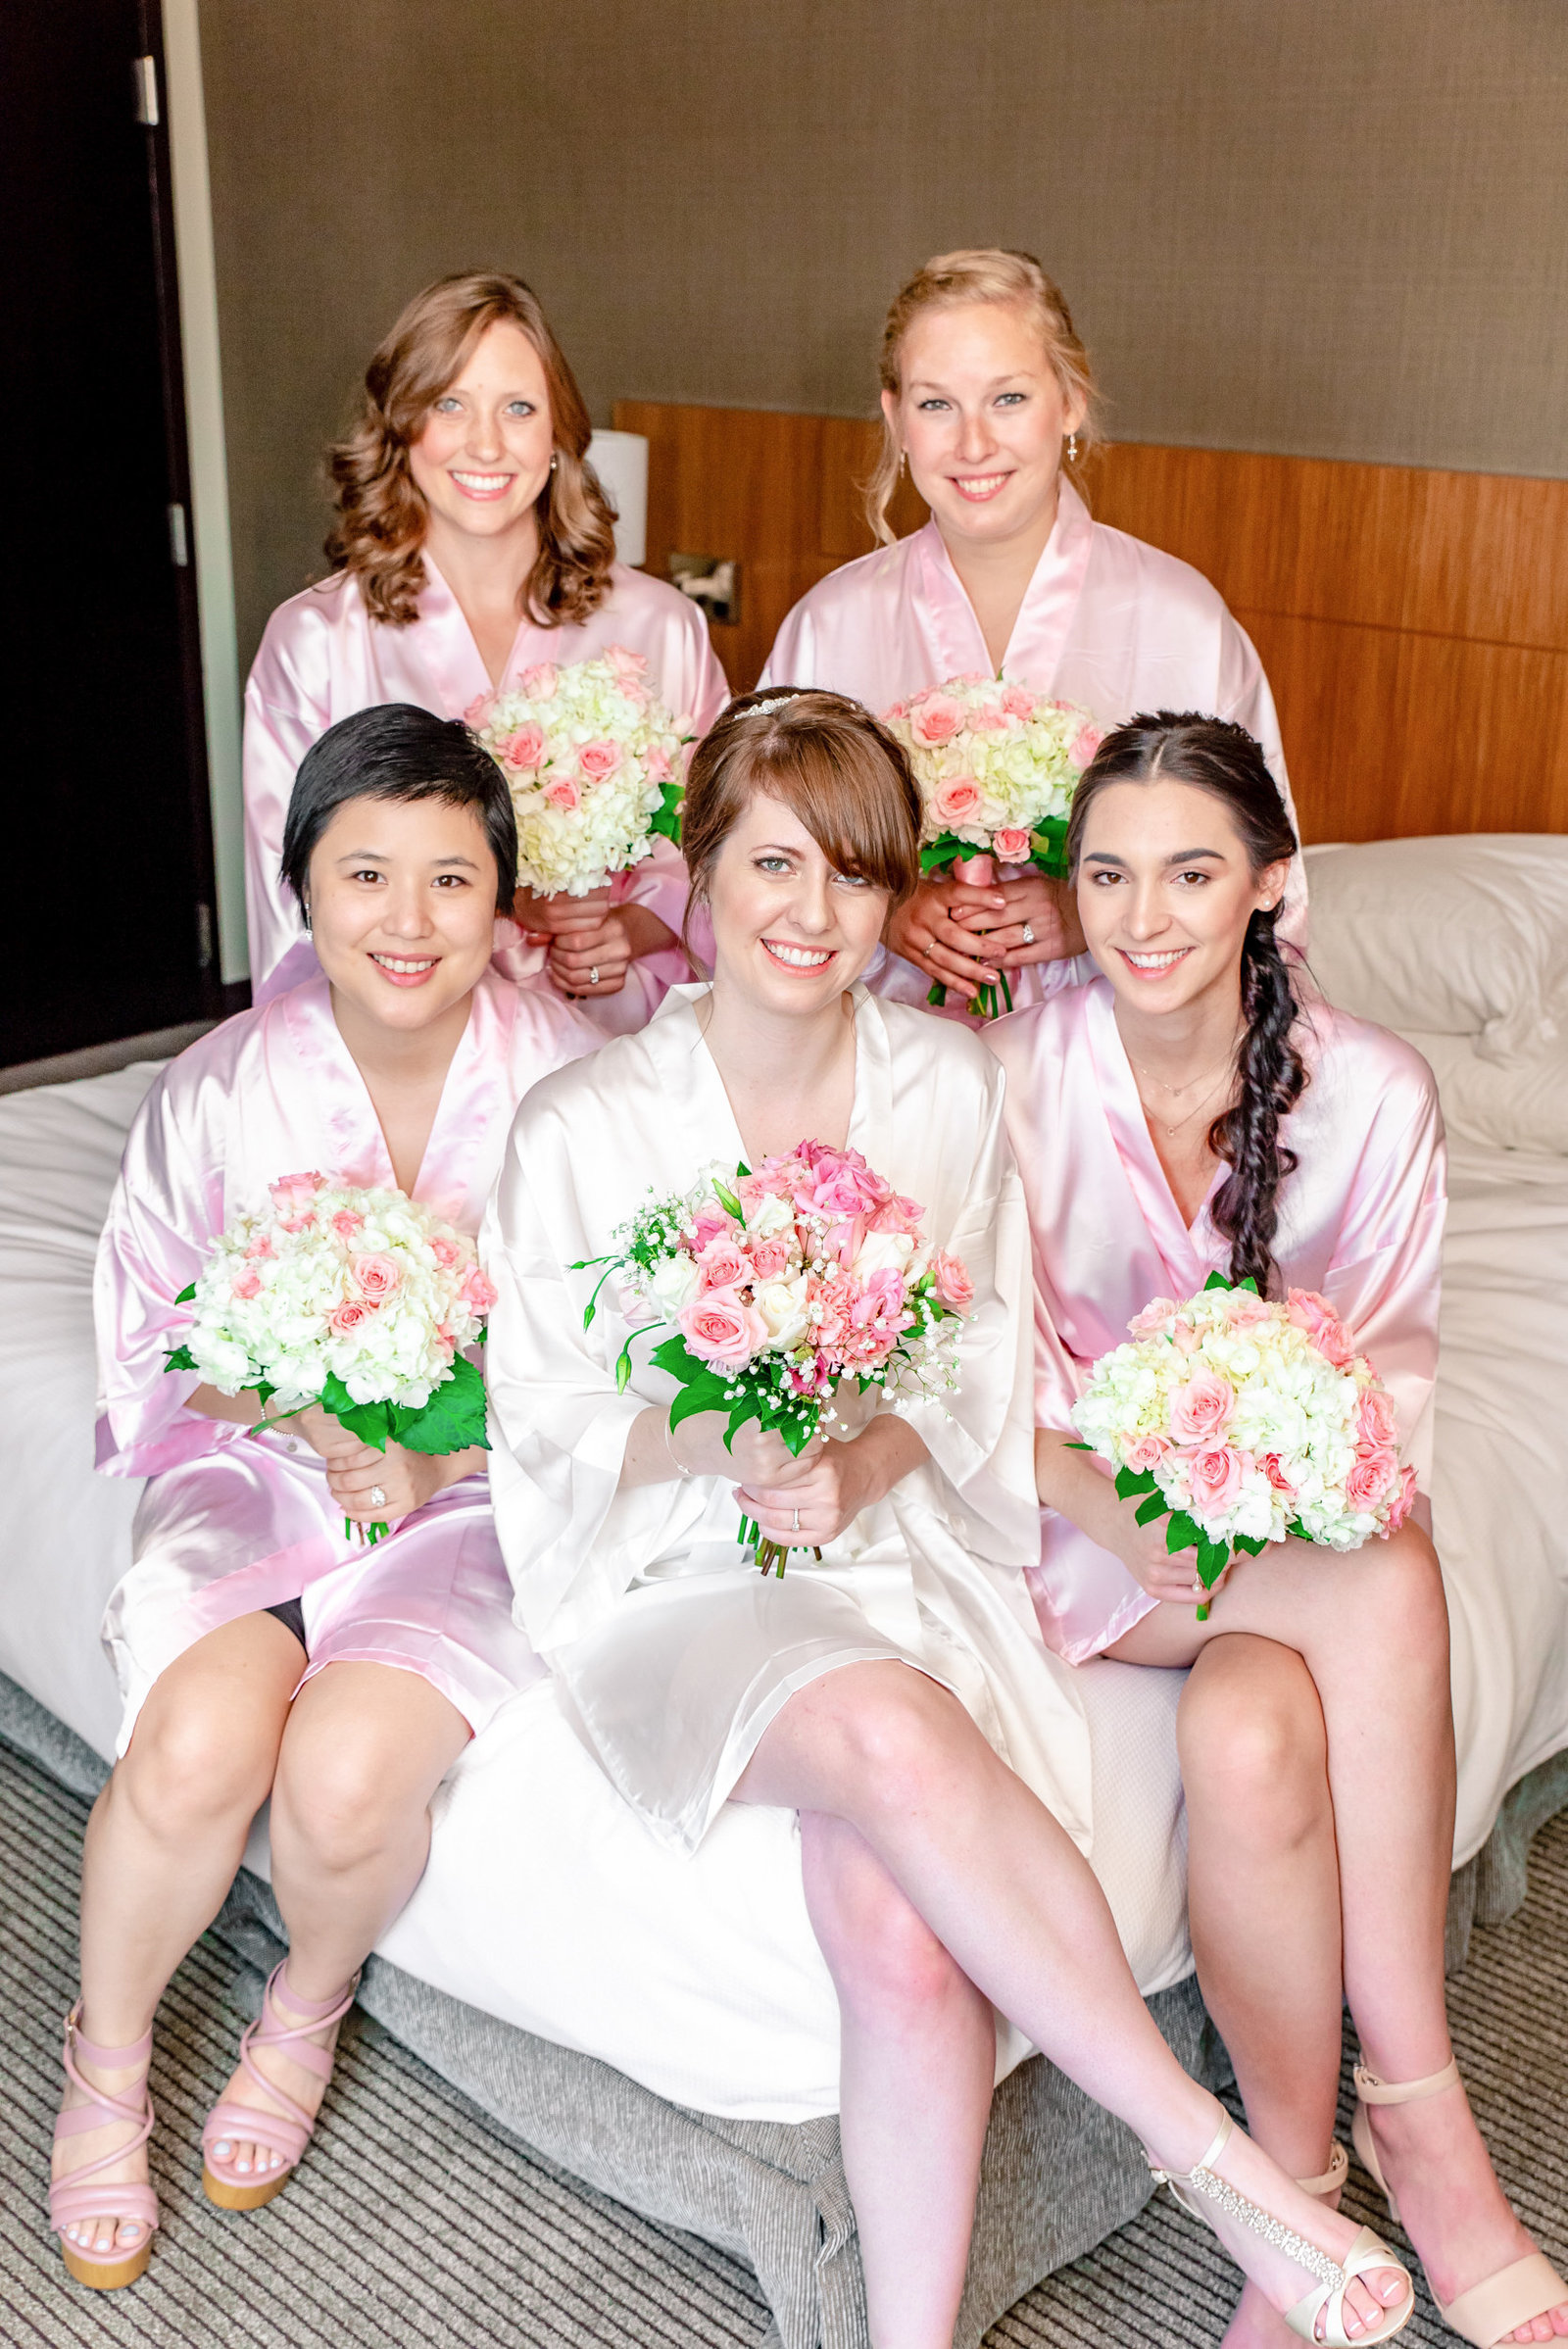 bridesmaids and bride pose on a bed for a photo